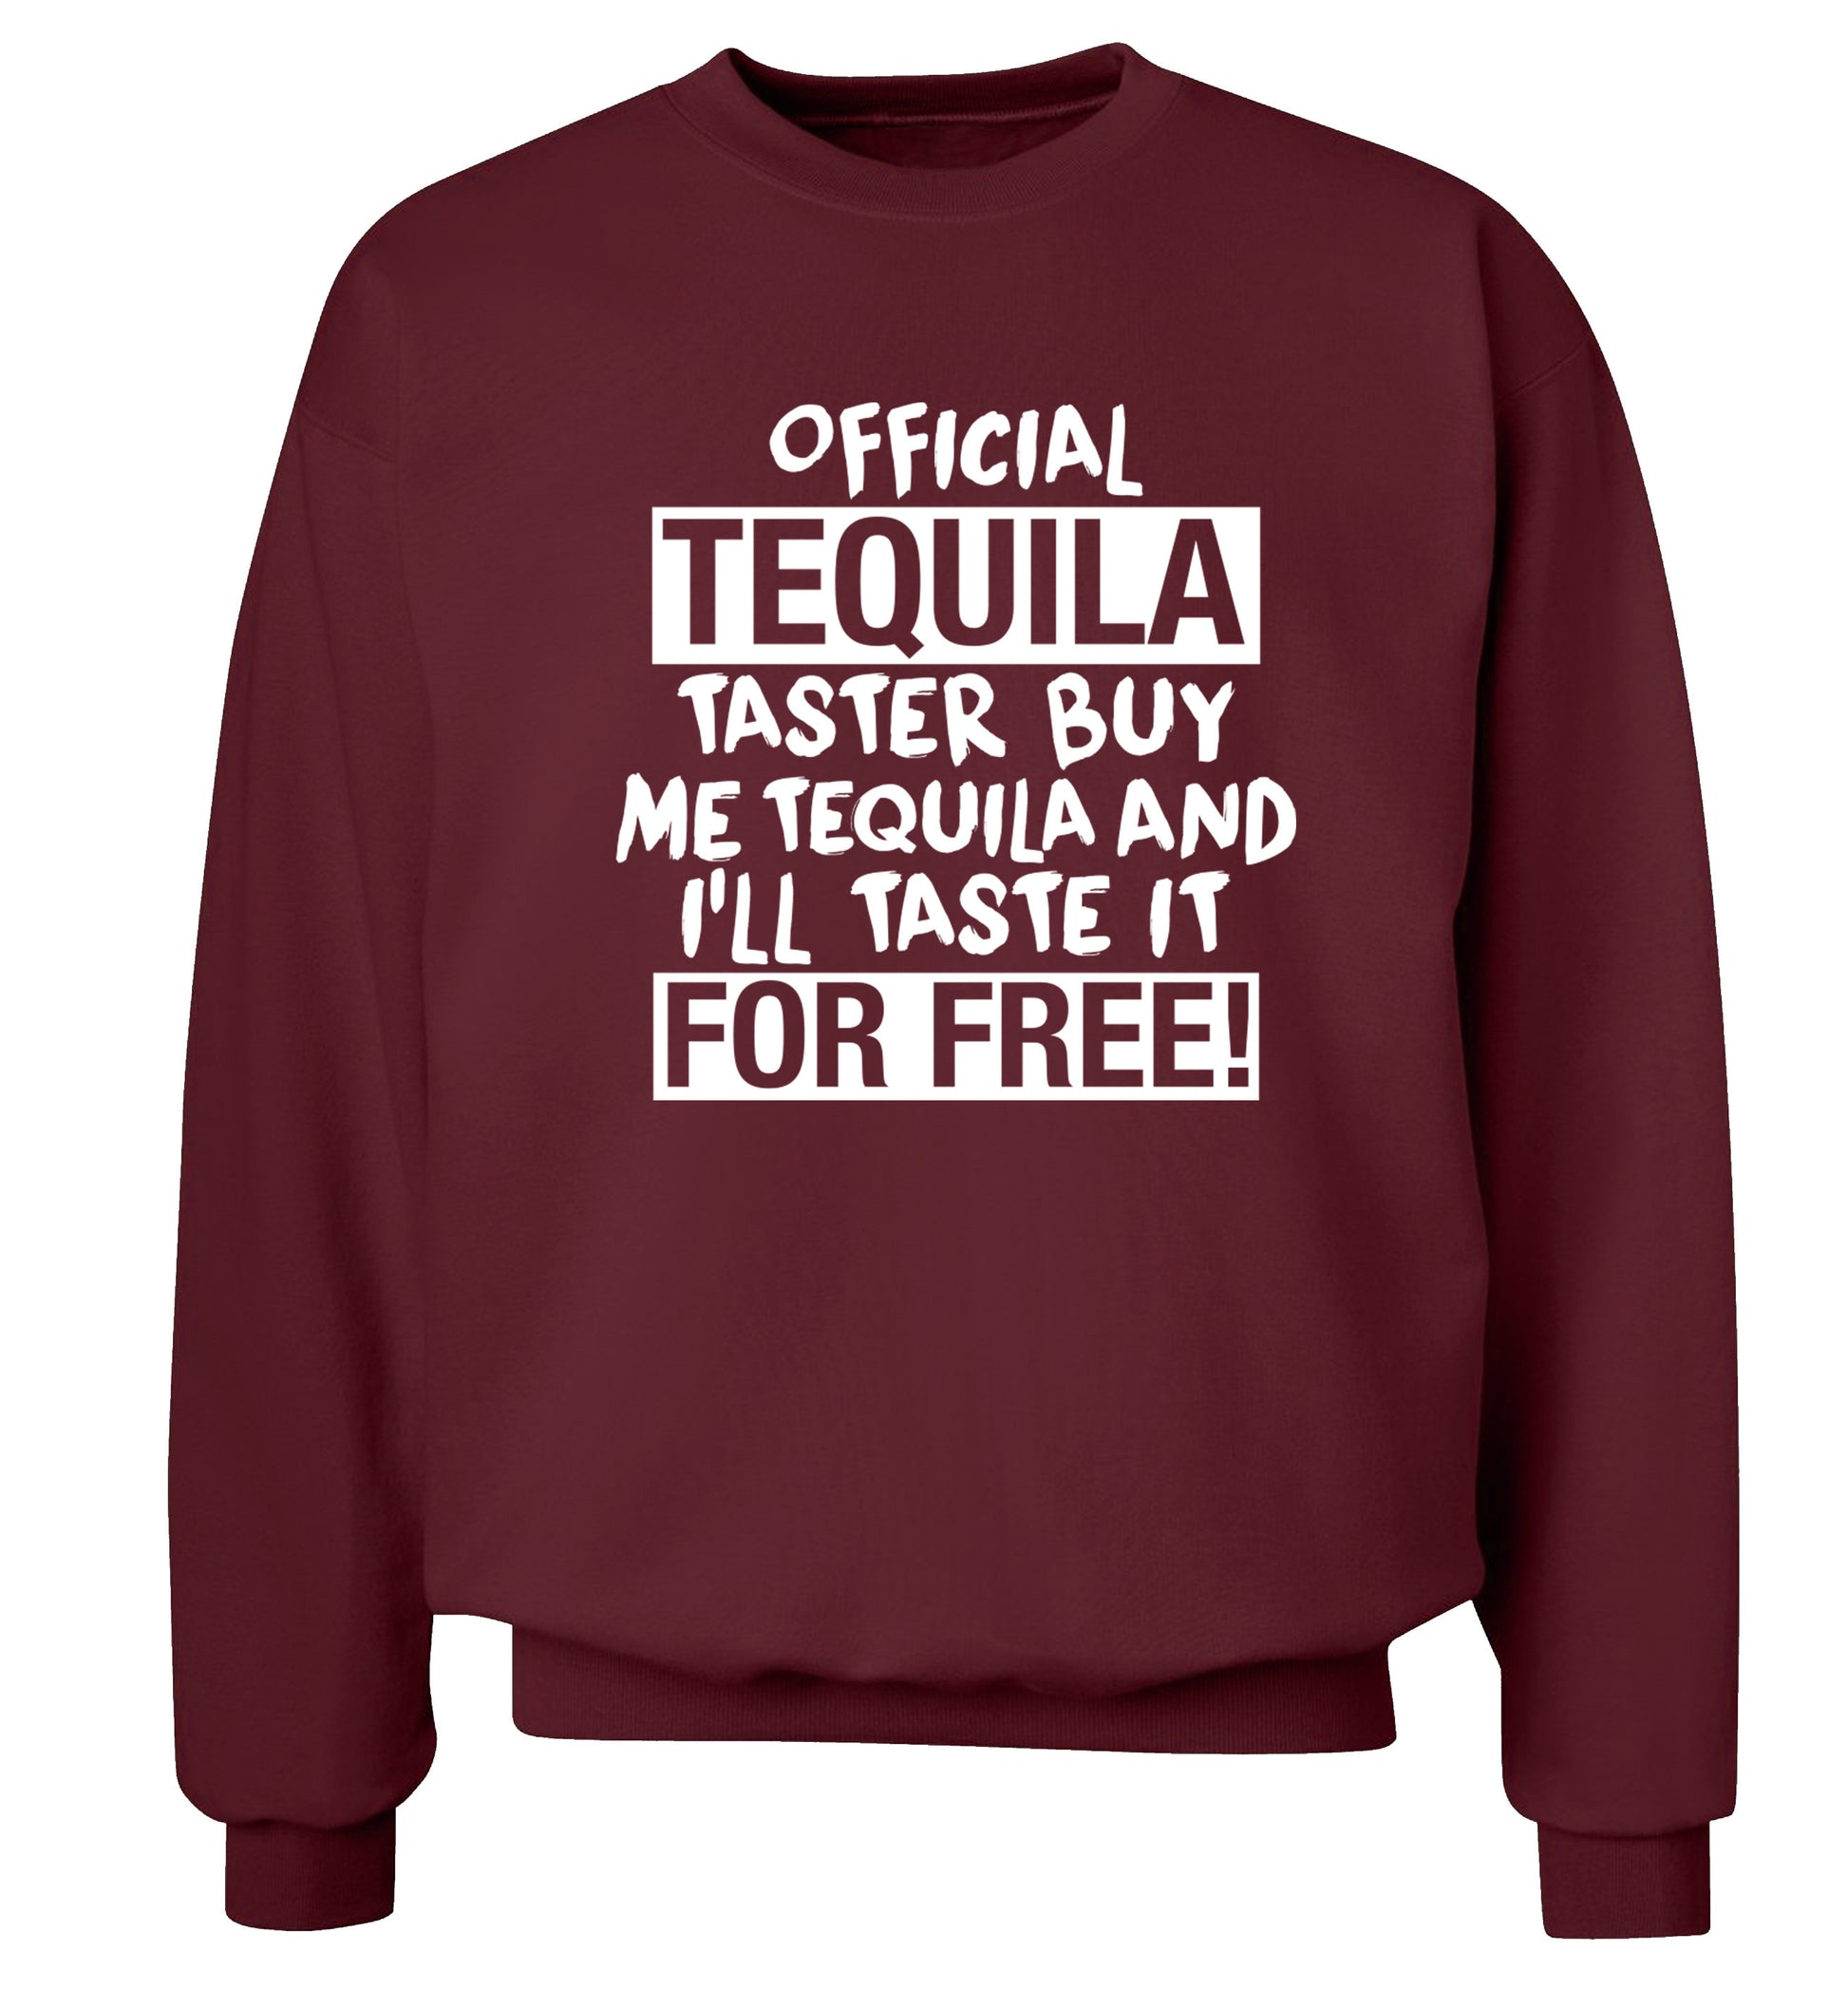 Official tequila taster buy me tequila and I'll taste it for free Adult's unisex maroon Sweater 2XL